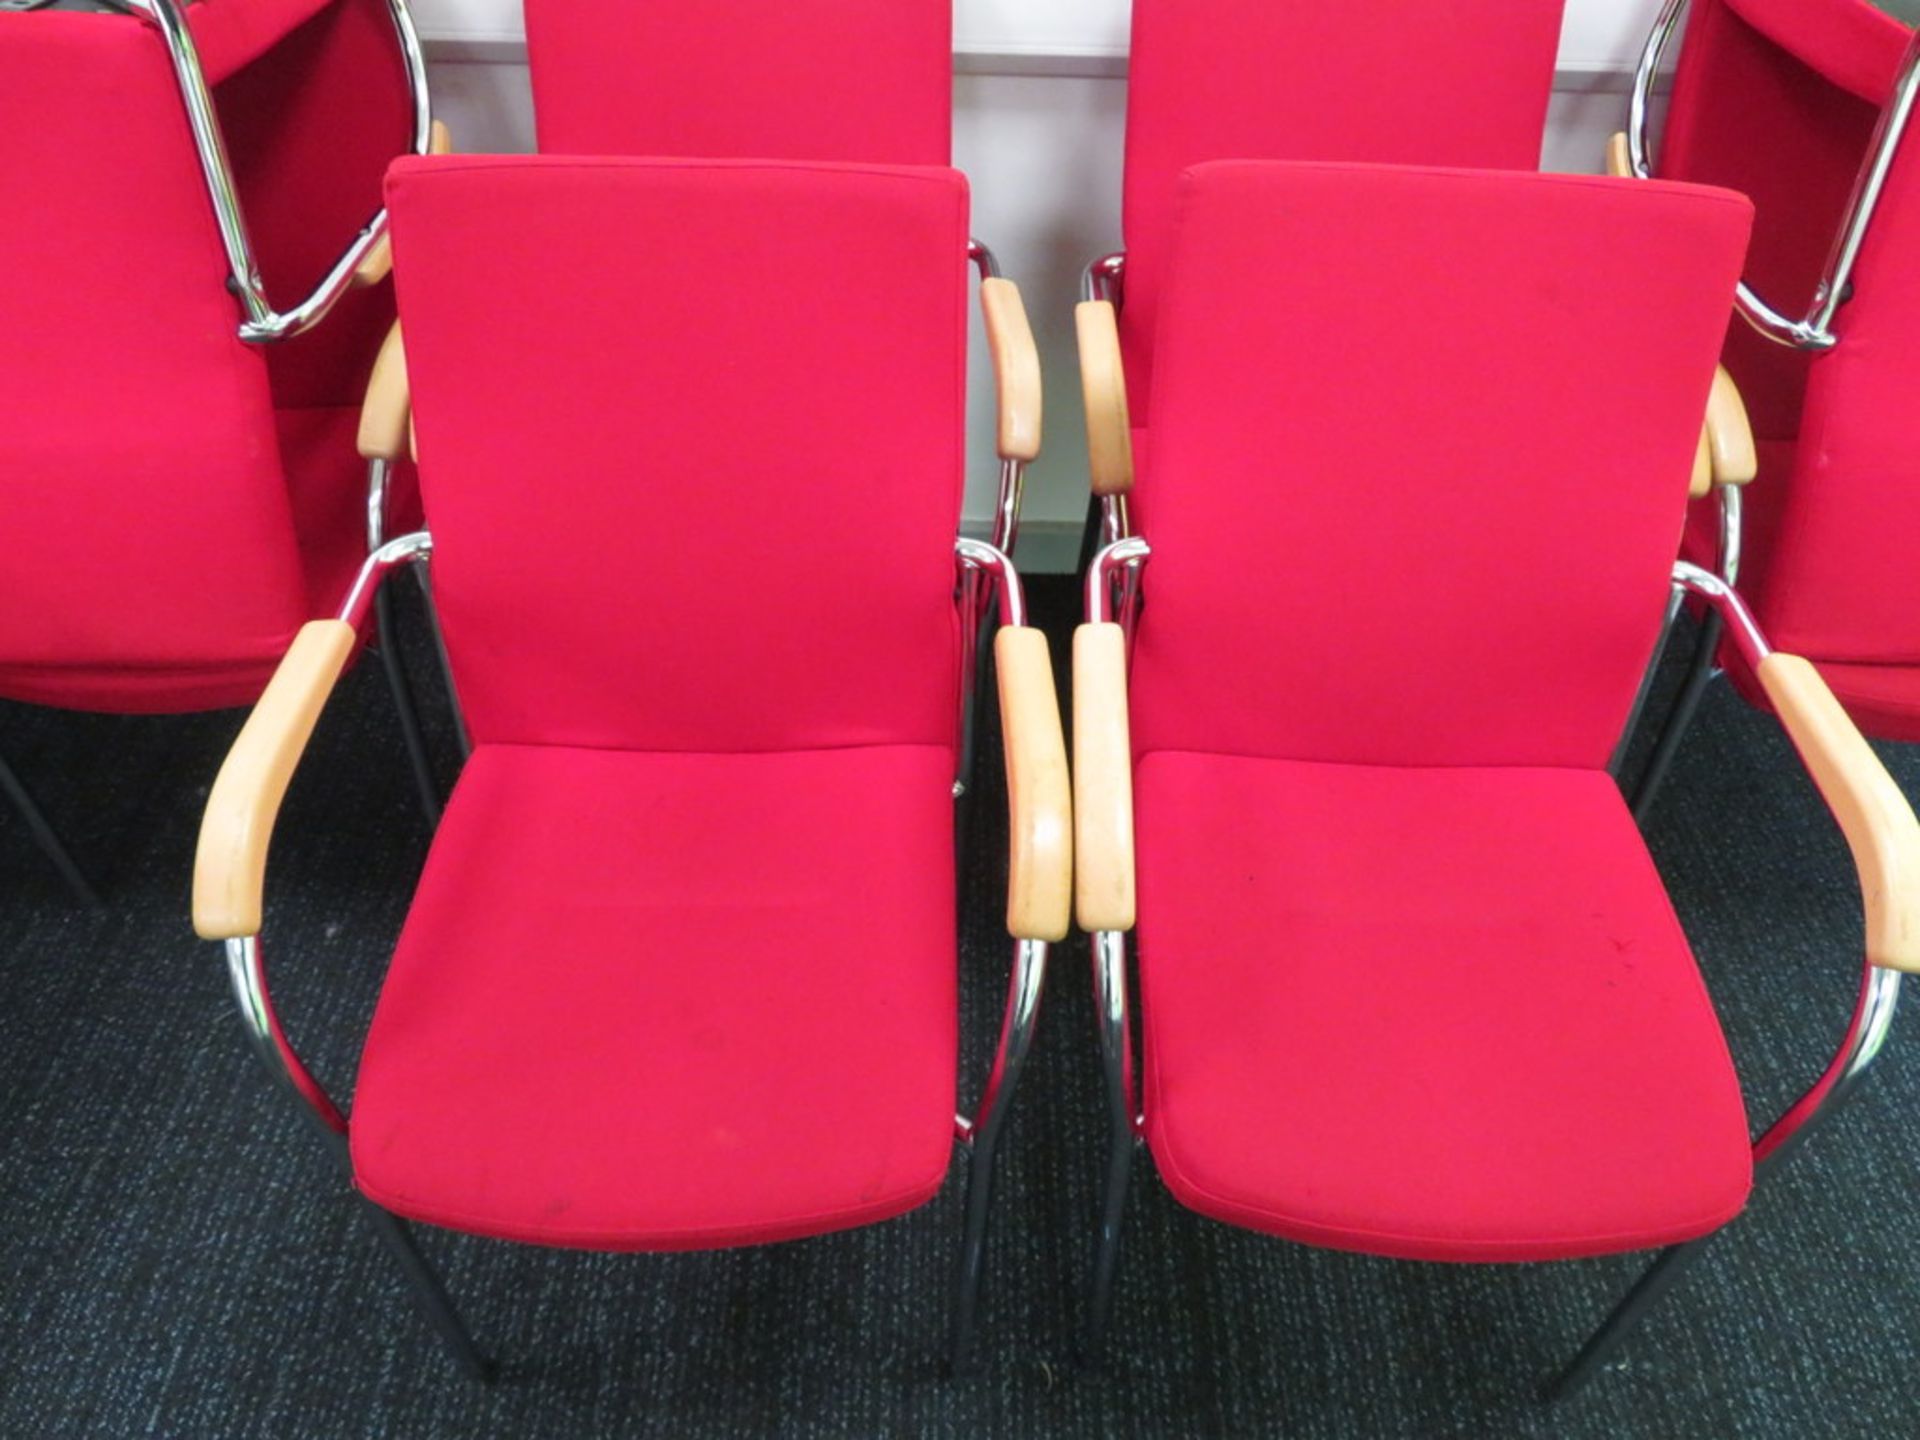 9x Red Upholstered Padded Chairs. - Image 2 of 3